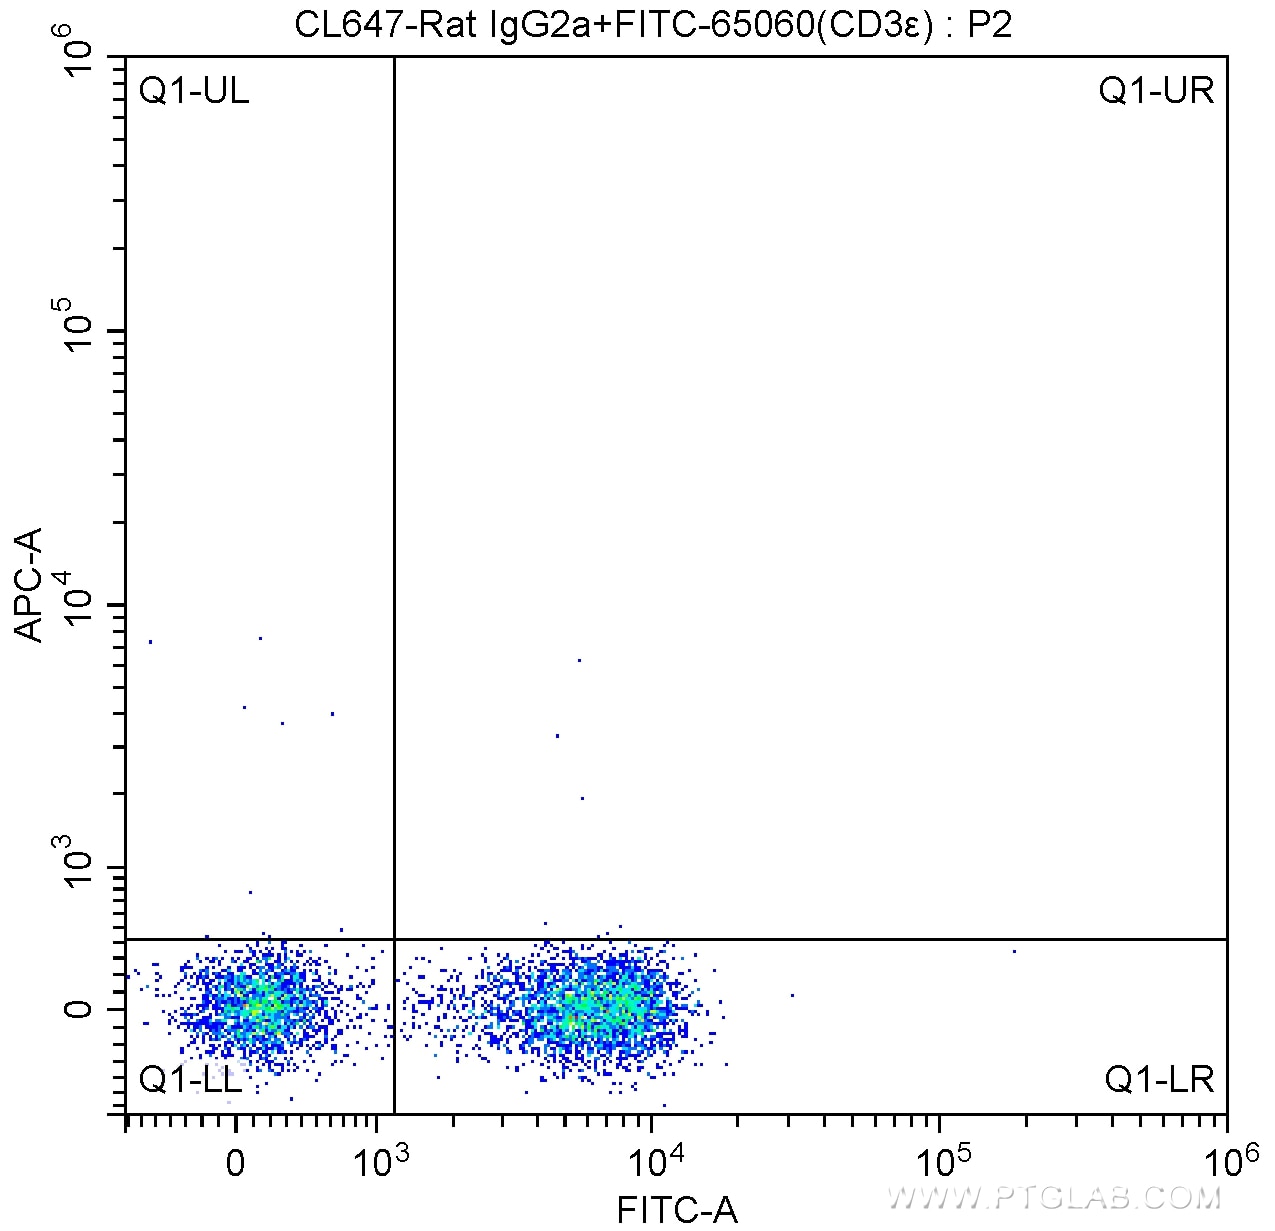 Flow cytometry (FC) experiment of mouse splenocytes using CoraLite® Plus 647 Anti-Mouse CD16/32 (93) (CL647-65057)